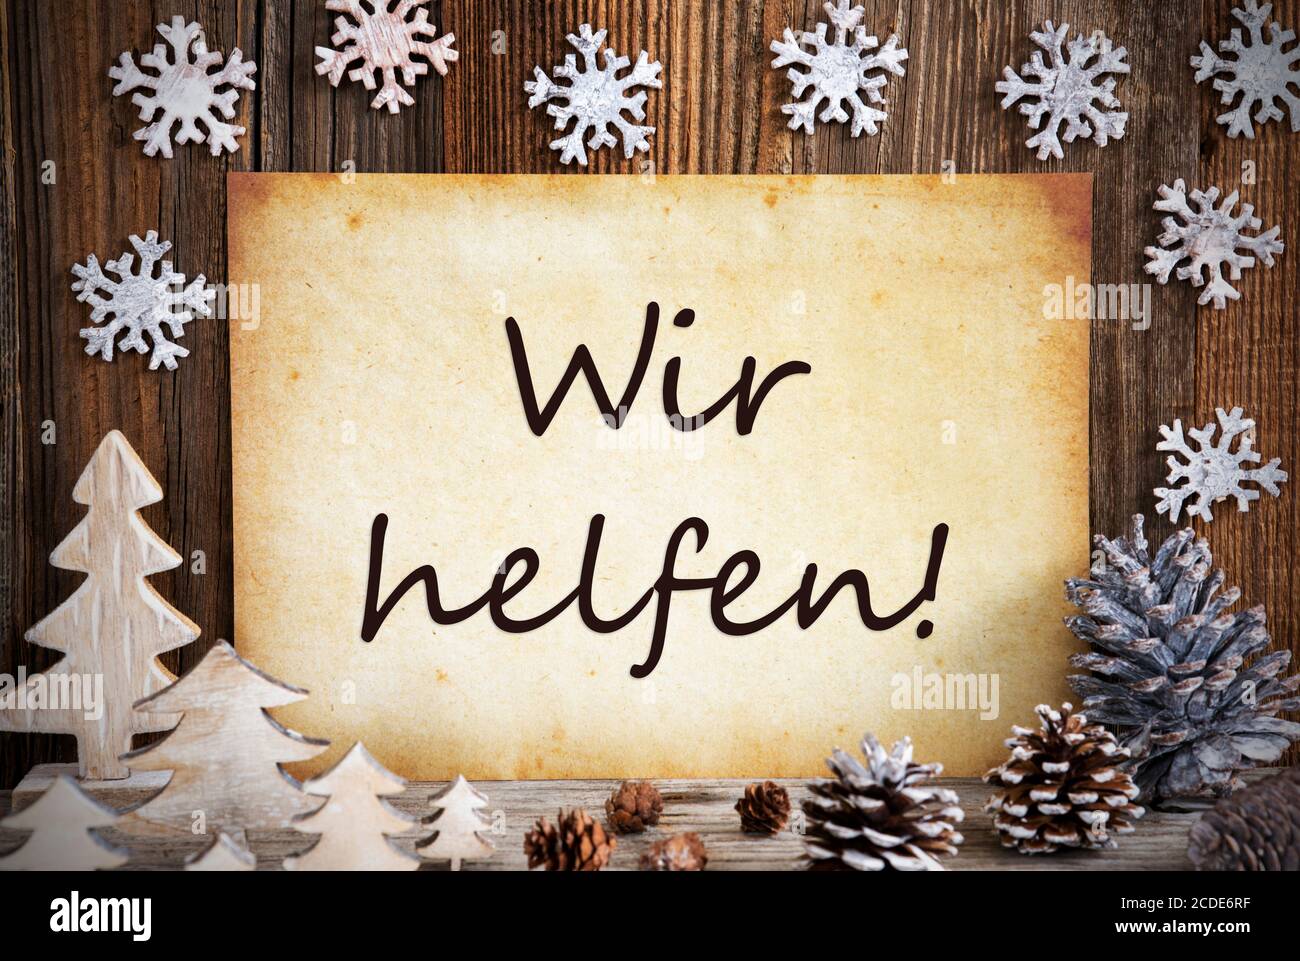 Old Paper, Christmas Decoration, Wir Helfen Means We Help Stock Photo